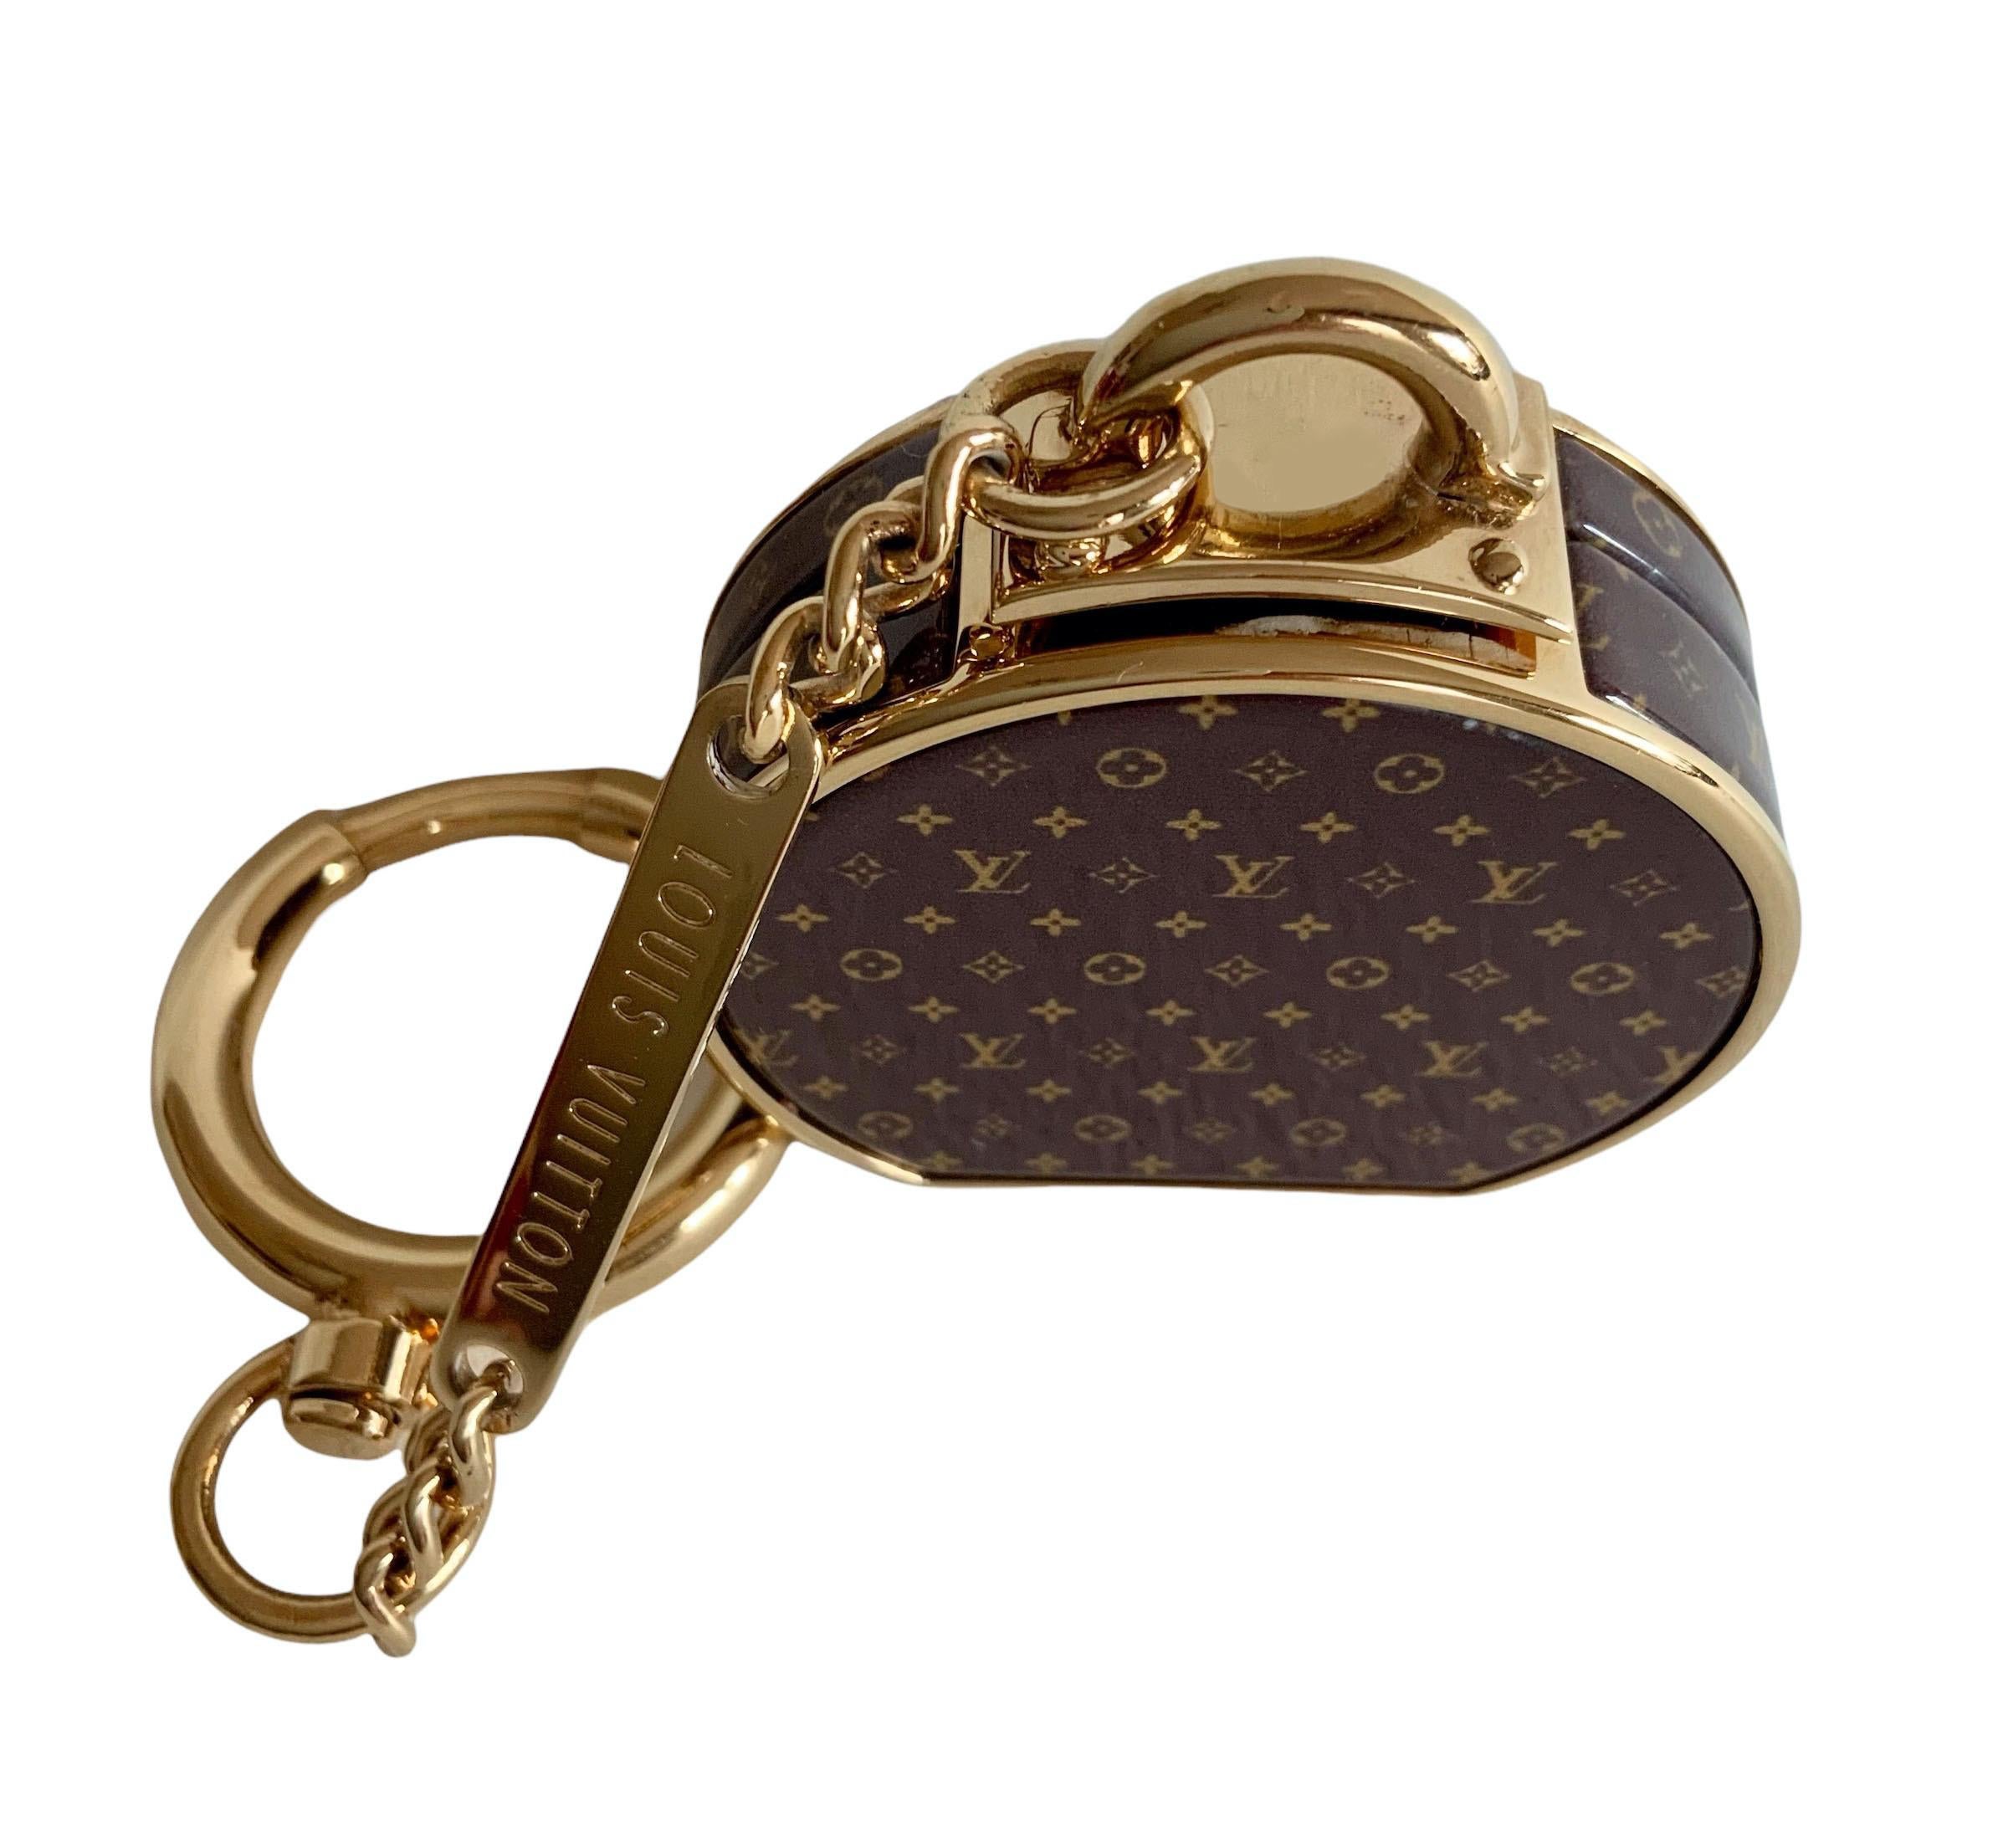 lv iridescent keychain key ring bag charm - clothing & accessories